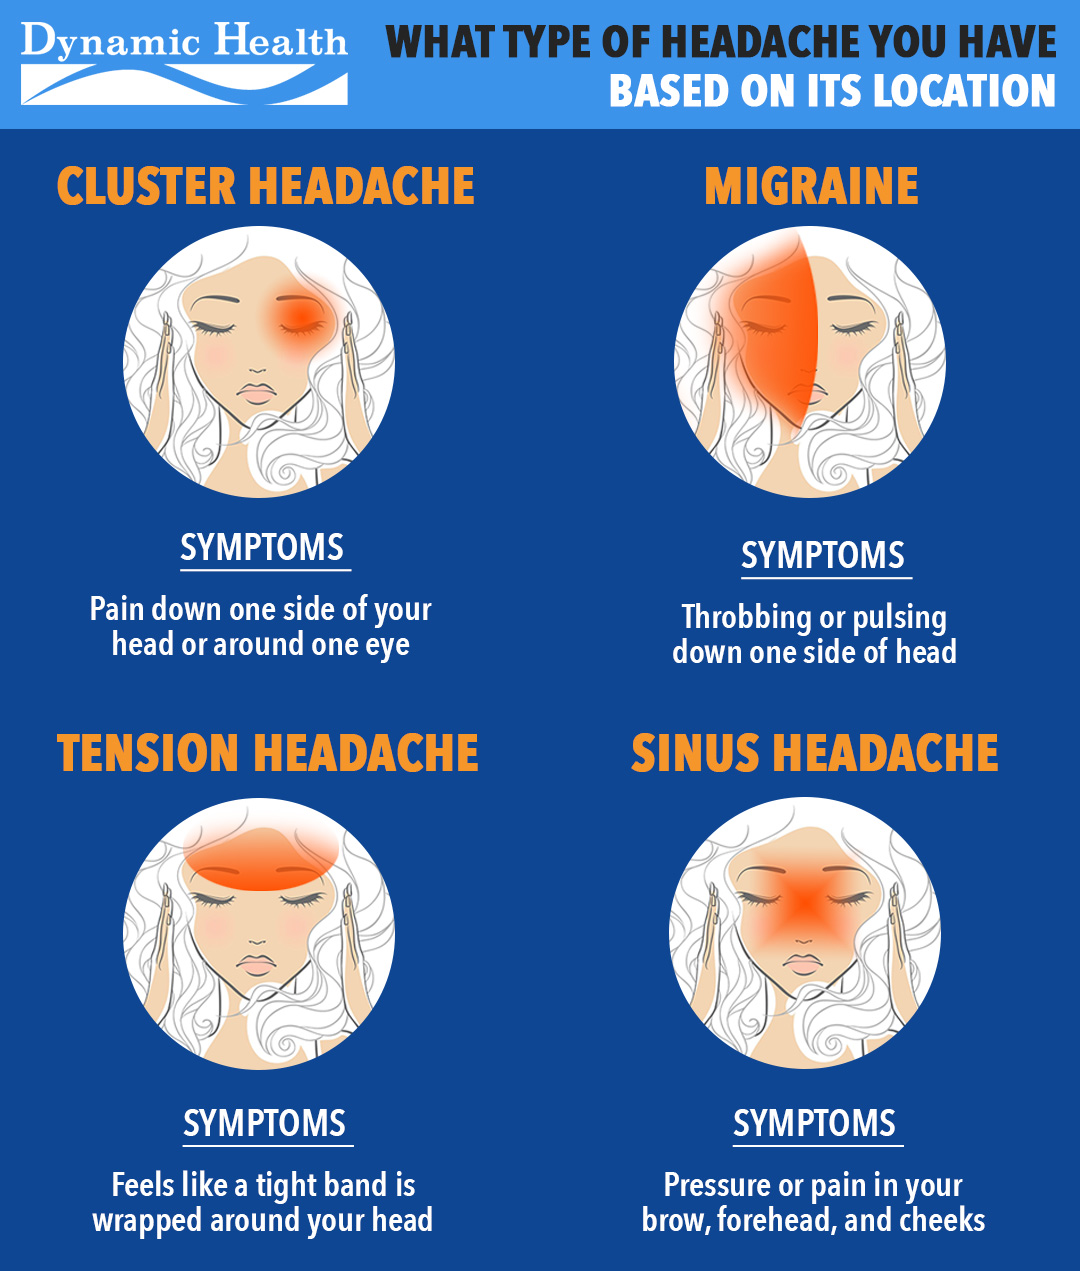 What Type of Headache You Have Based On Its Location